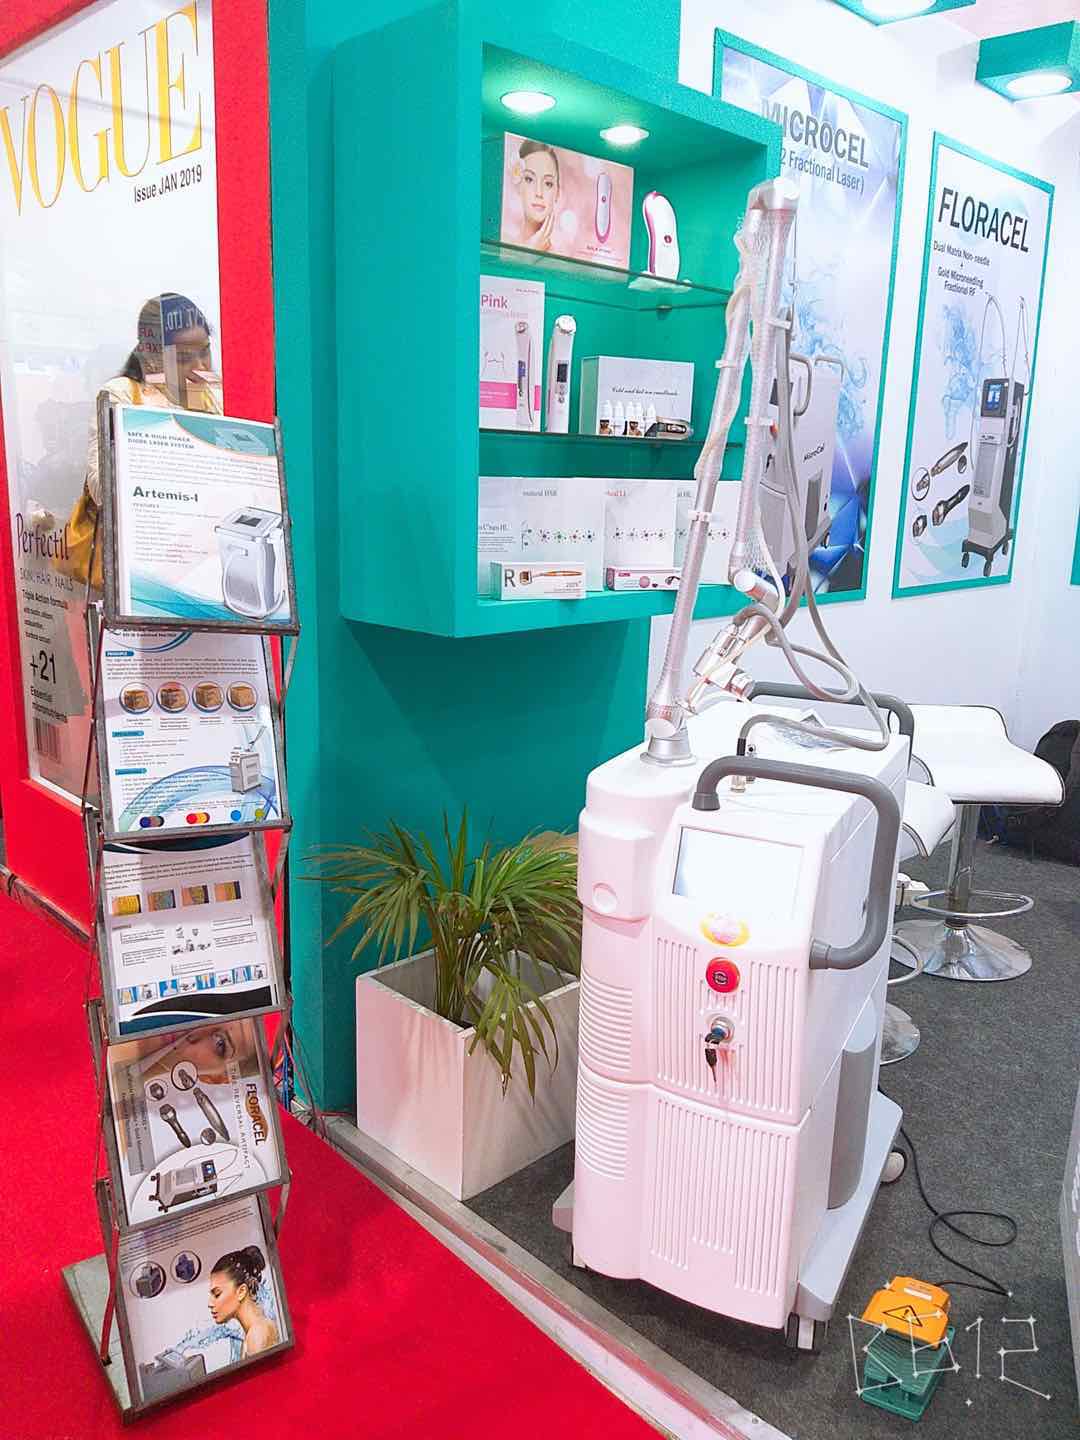 Co2 fractional laser is in India Show(image 1)